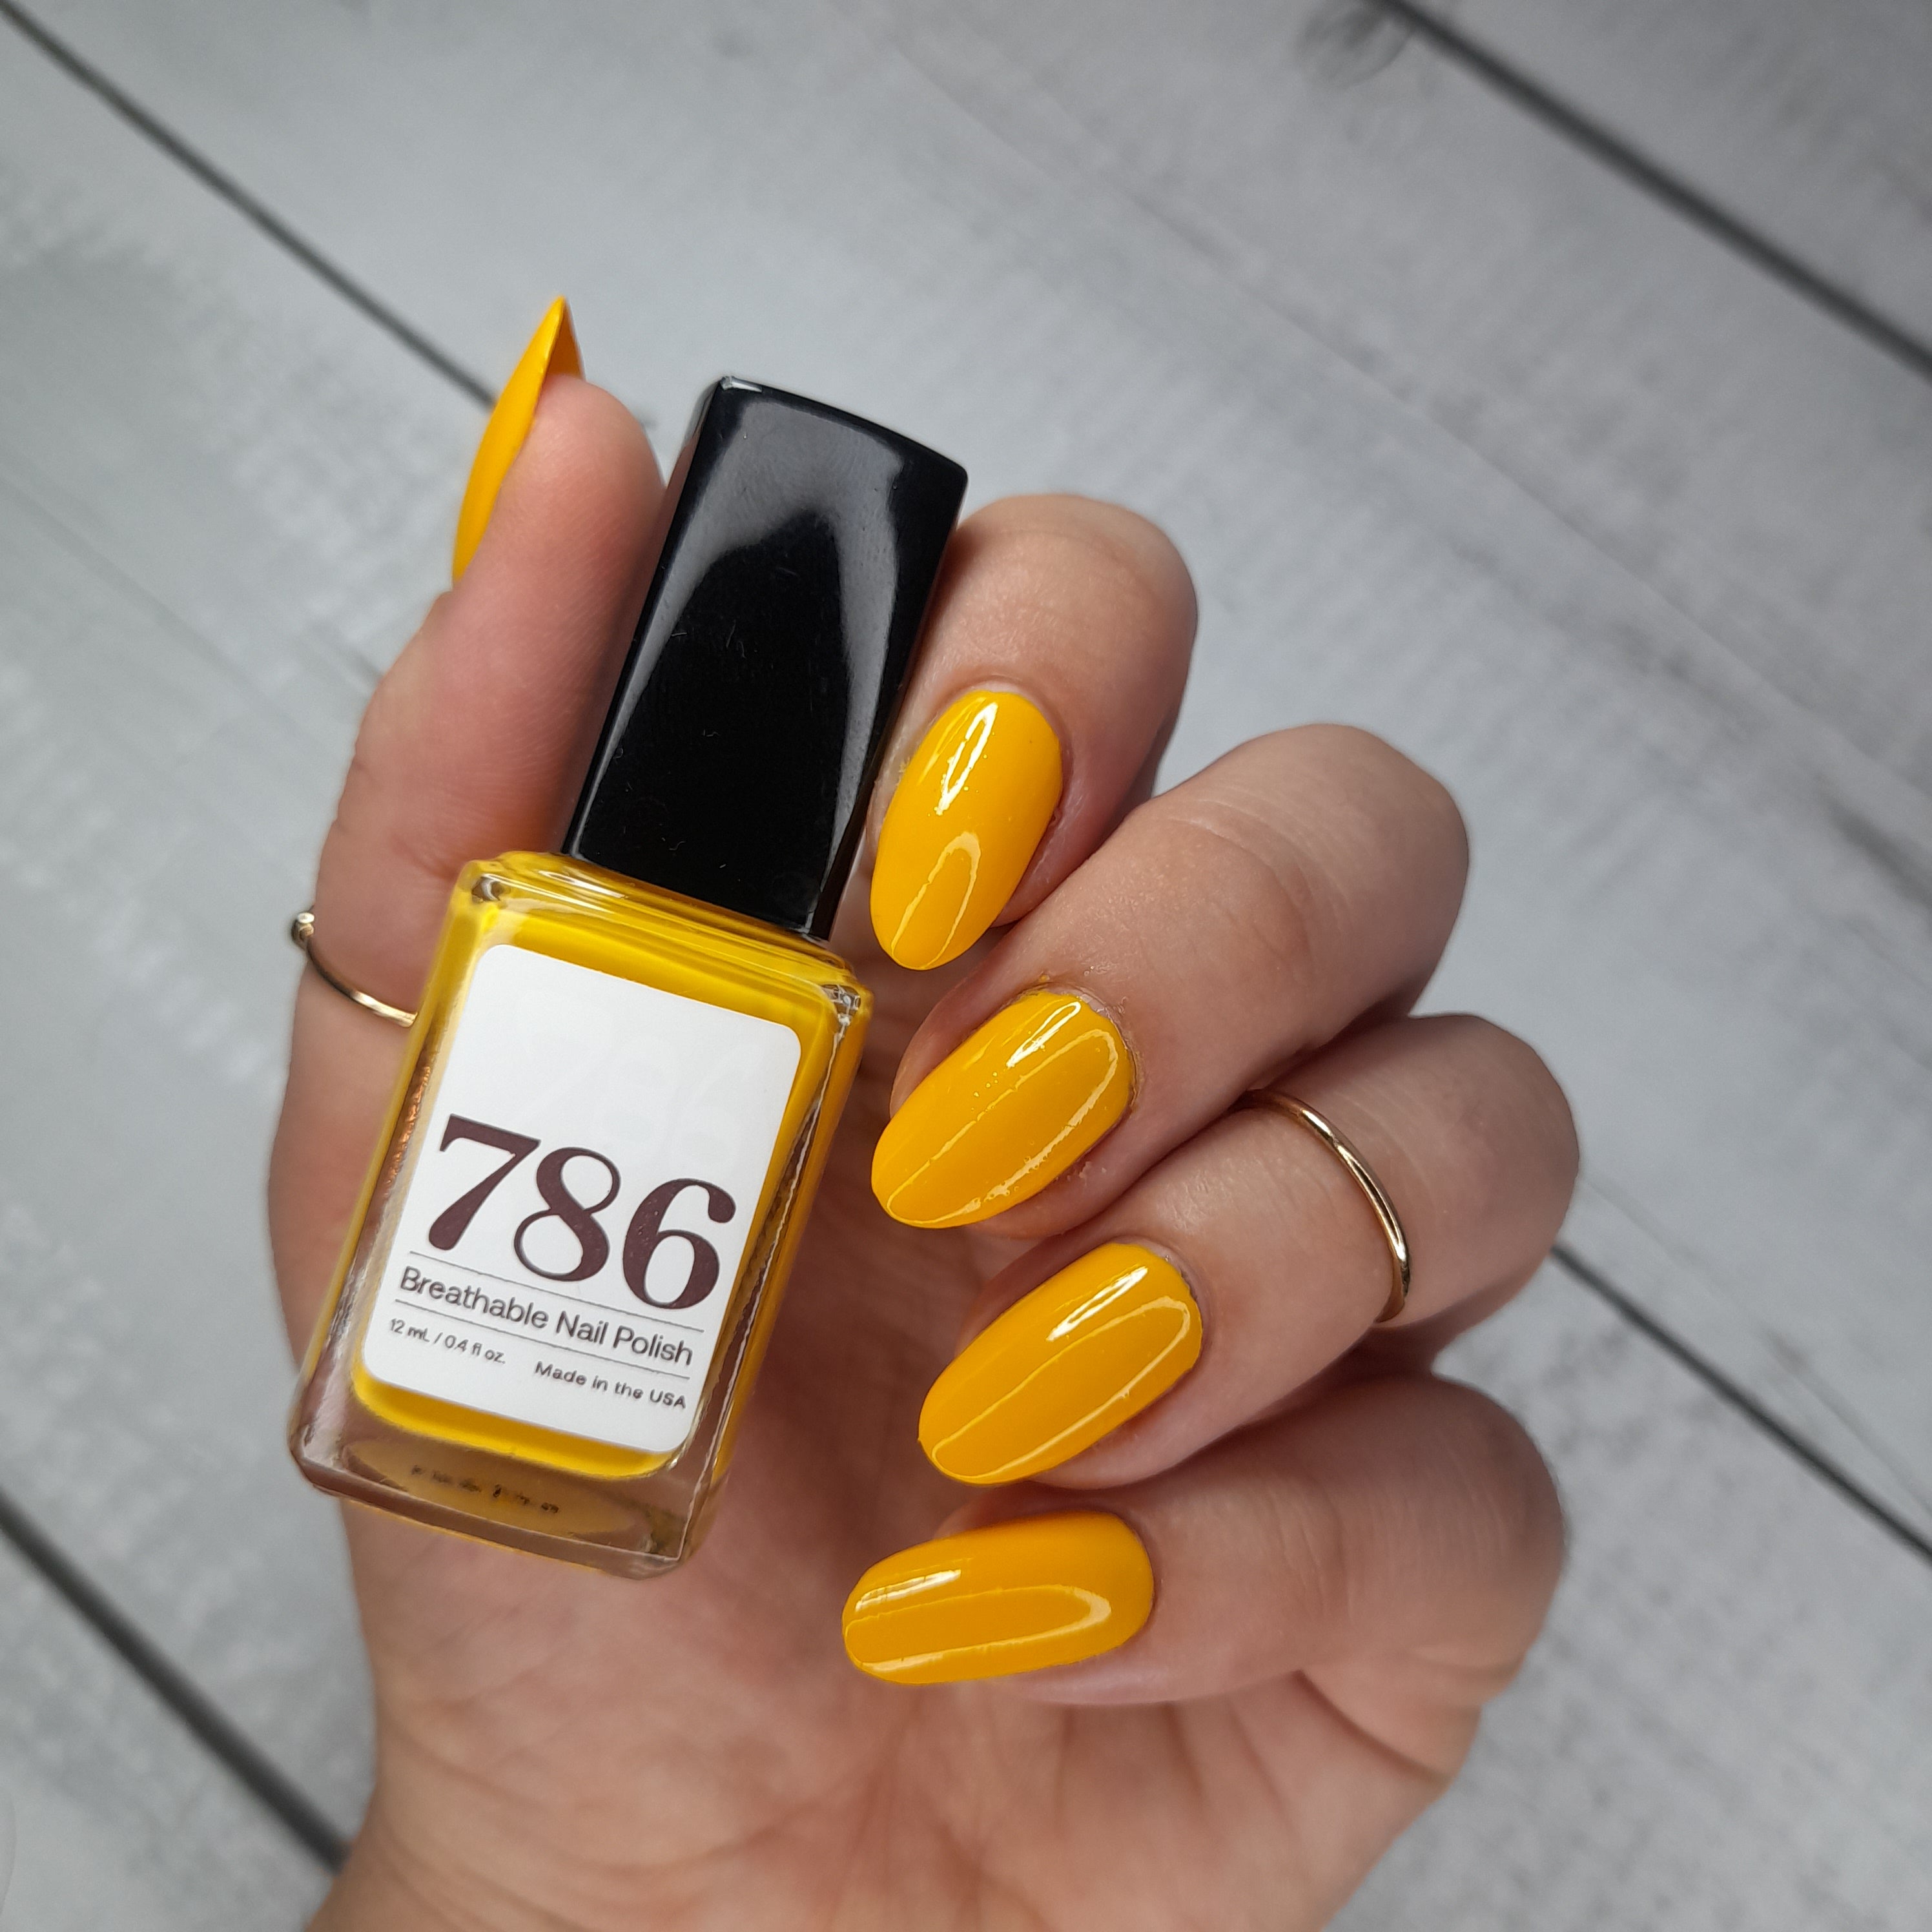 Treat Your Nails to a Cruelty-Free Manicure with 786 Cosmetics Nail Polish  - Chic Vegan